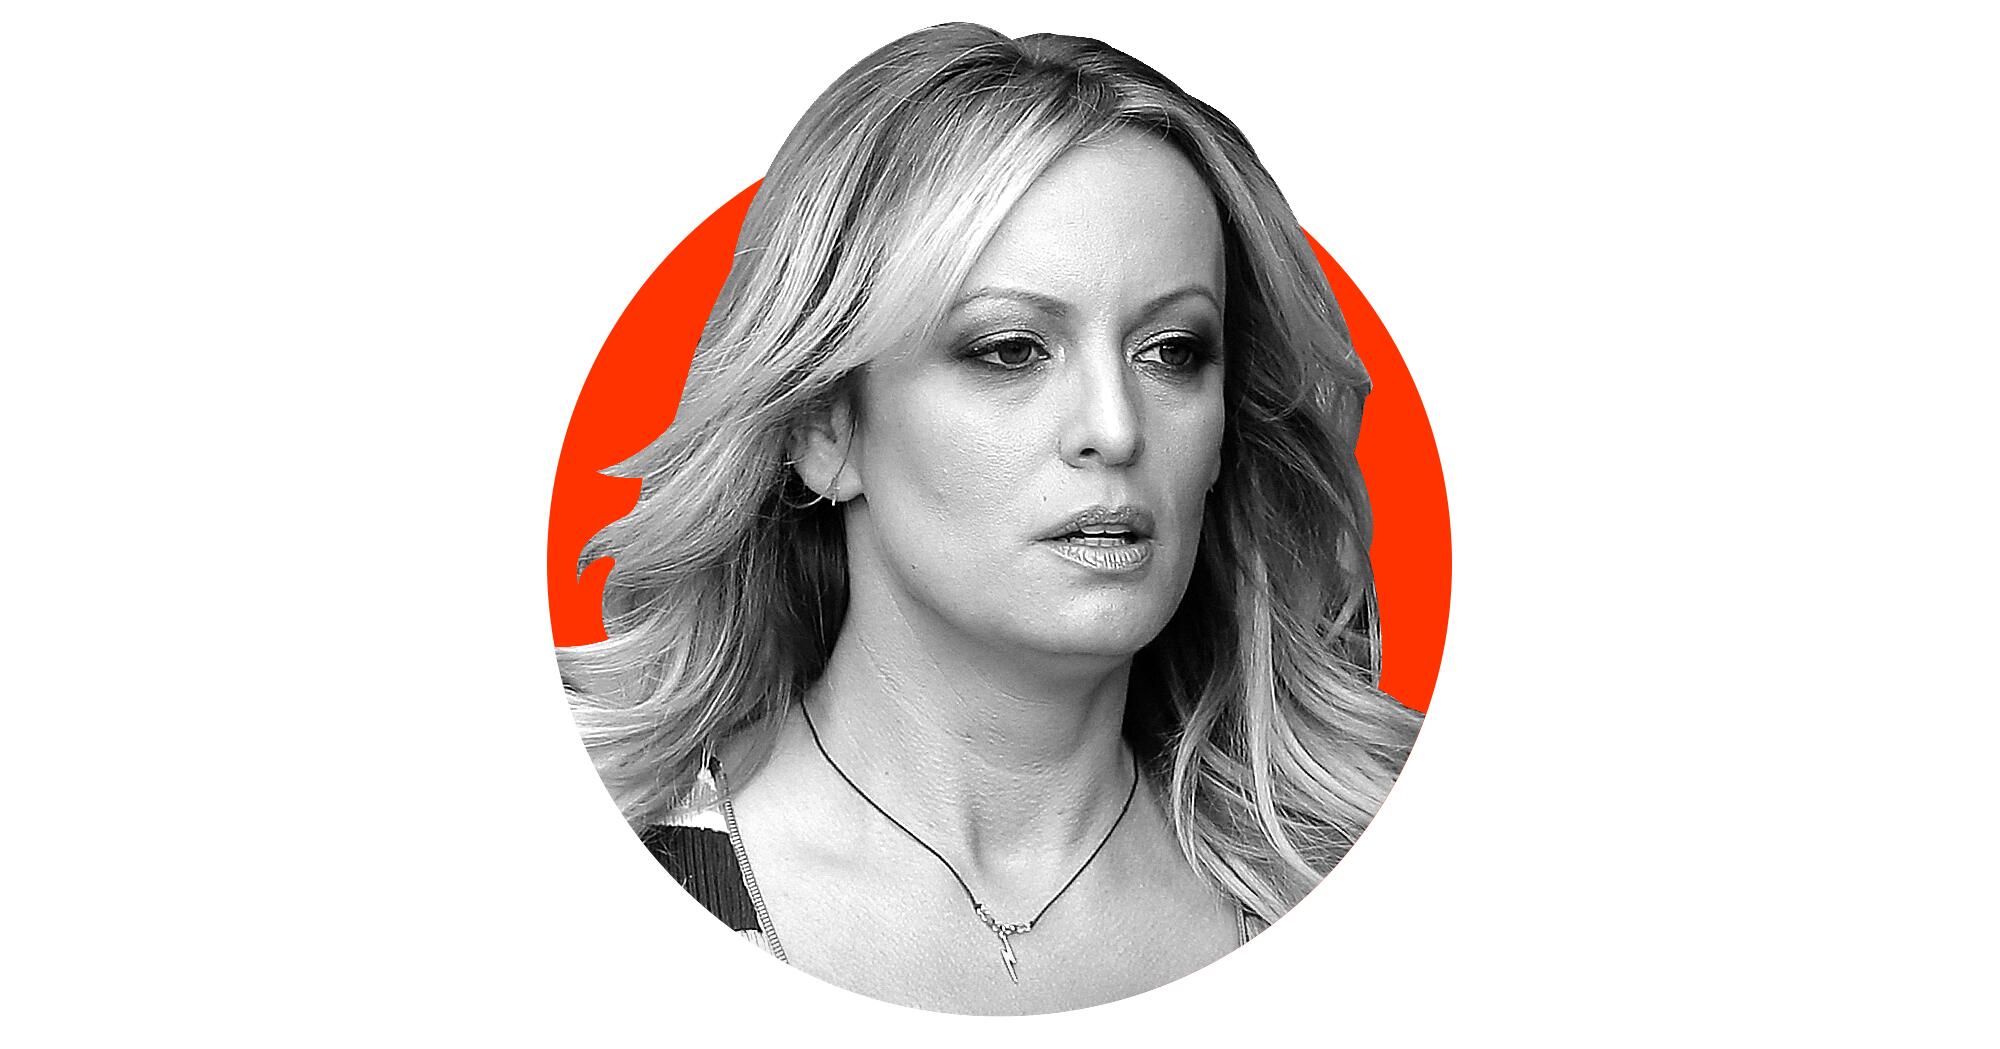 A photo illustration of a black-and-white headshot of Stormy Daniels emerging from a red circle